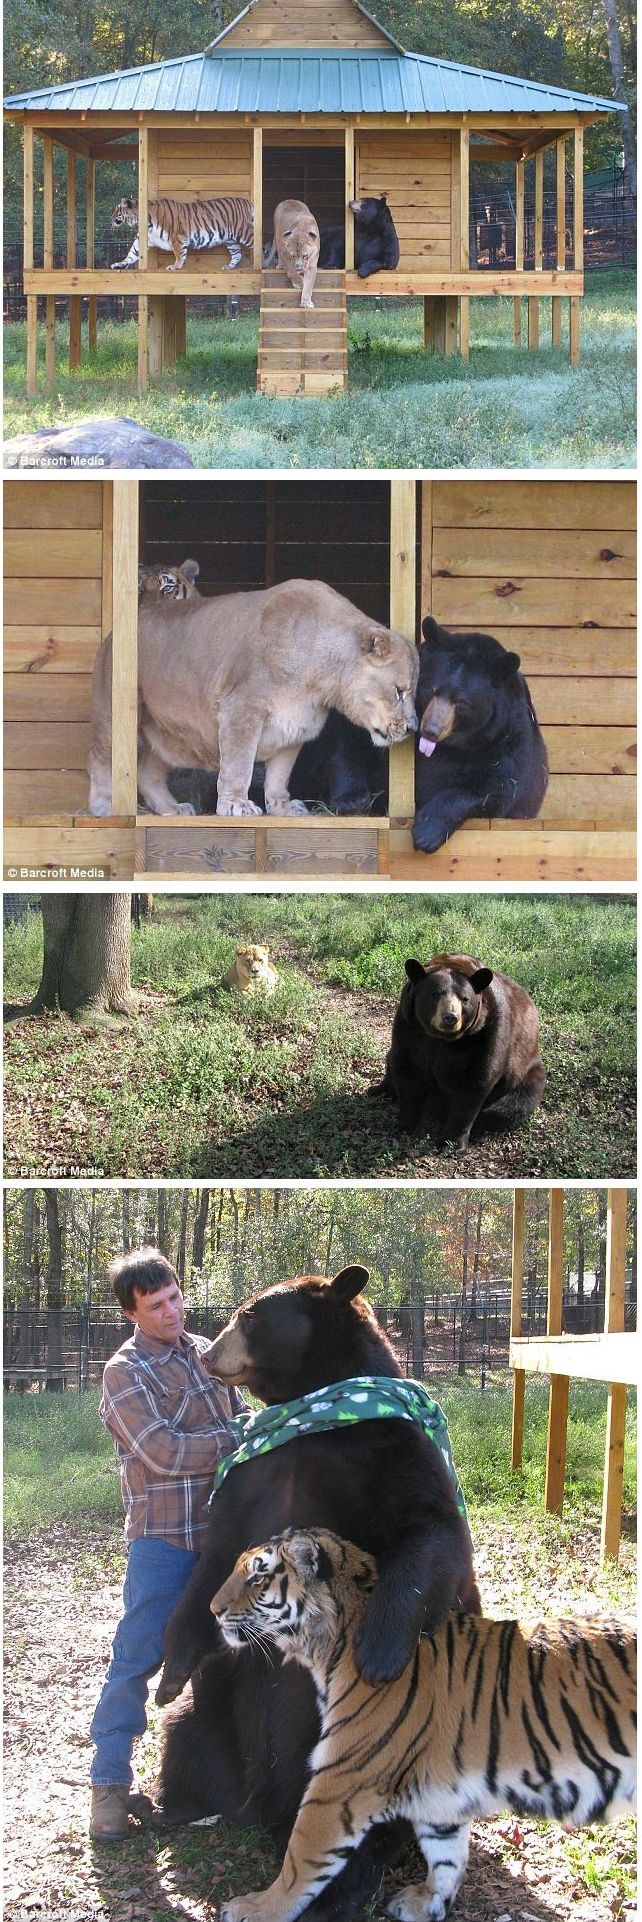 Lions Tigers and Bears, Oh My!